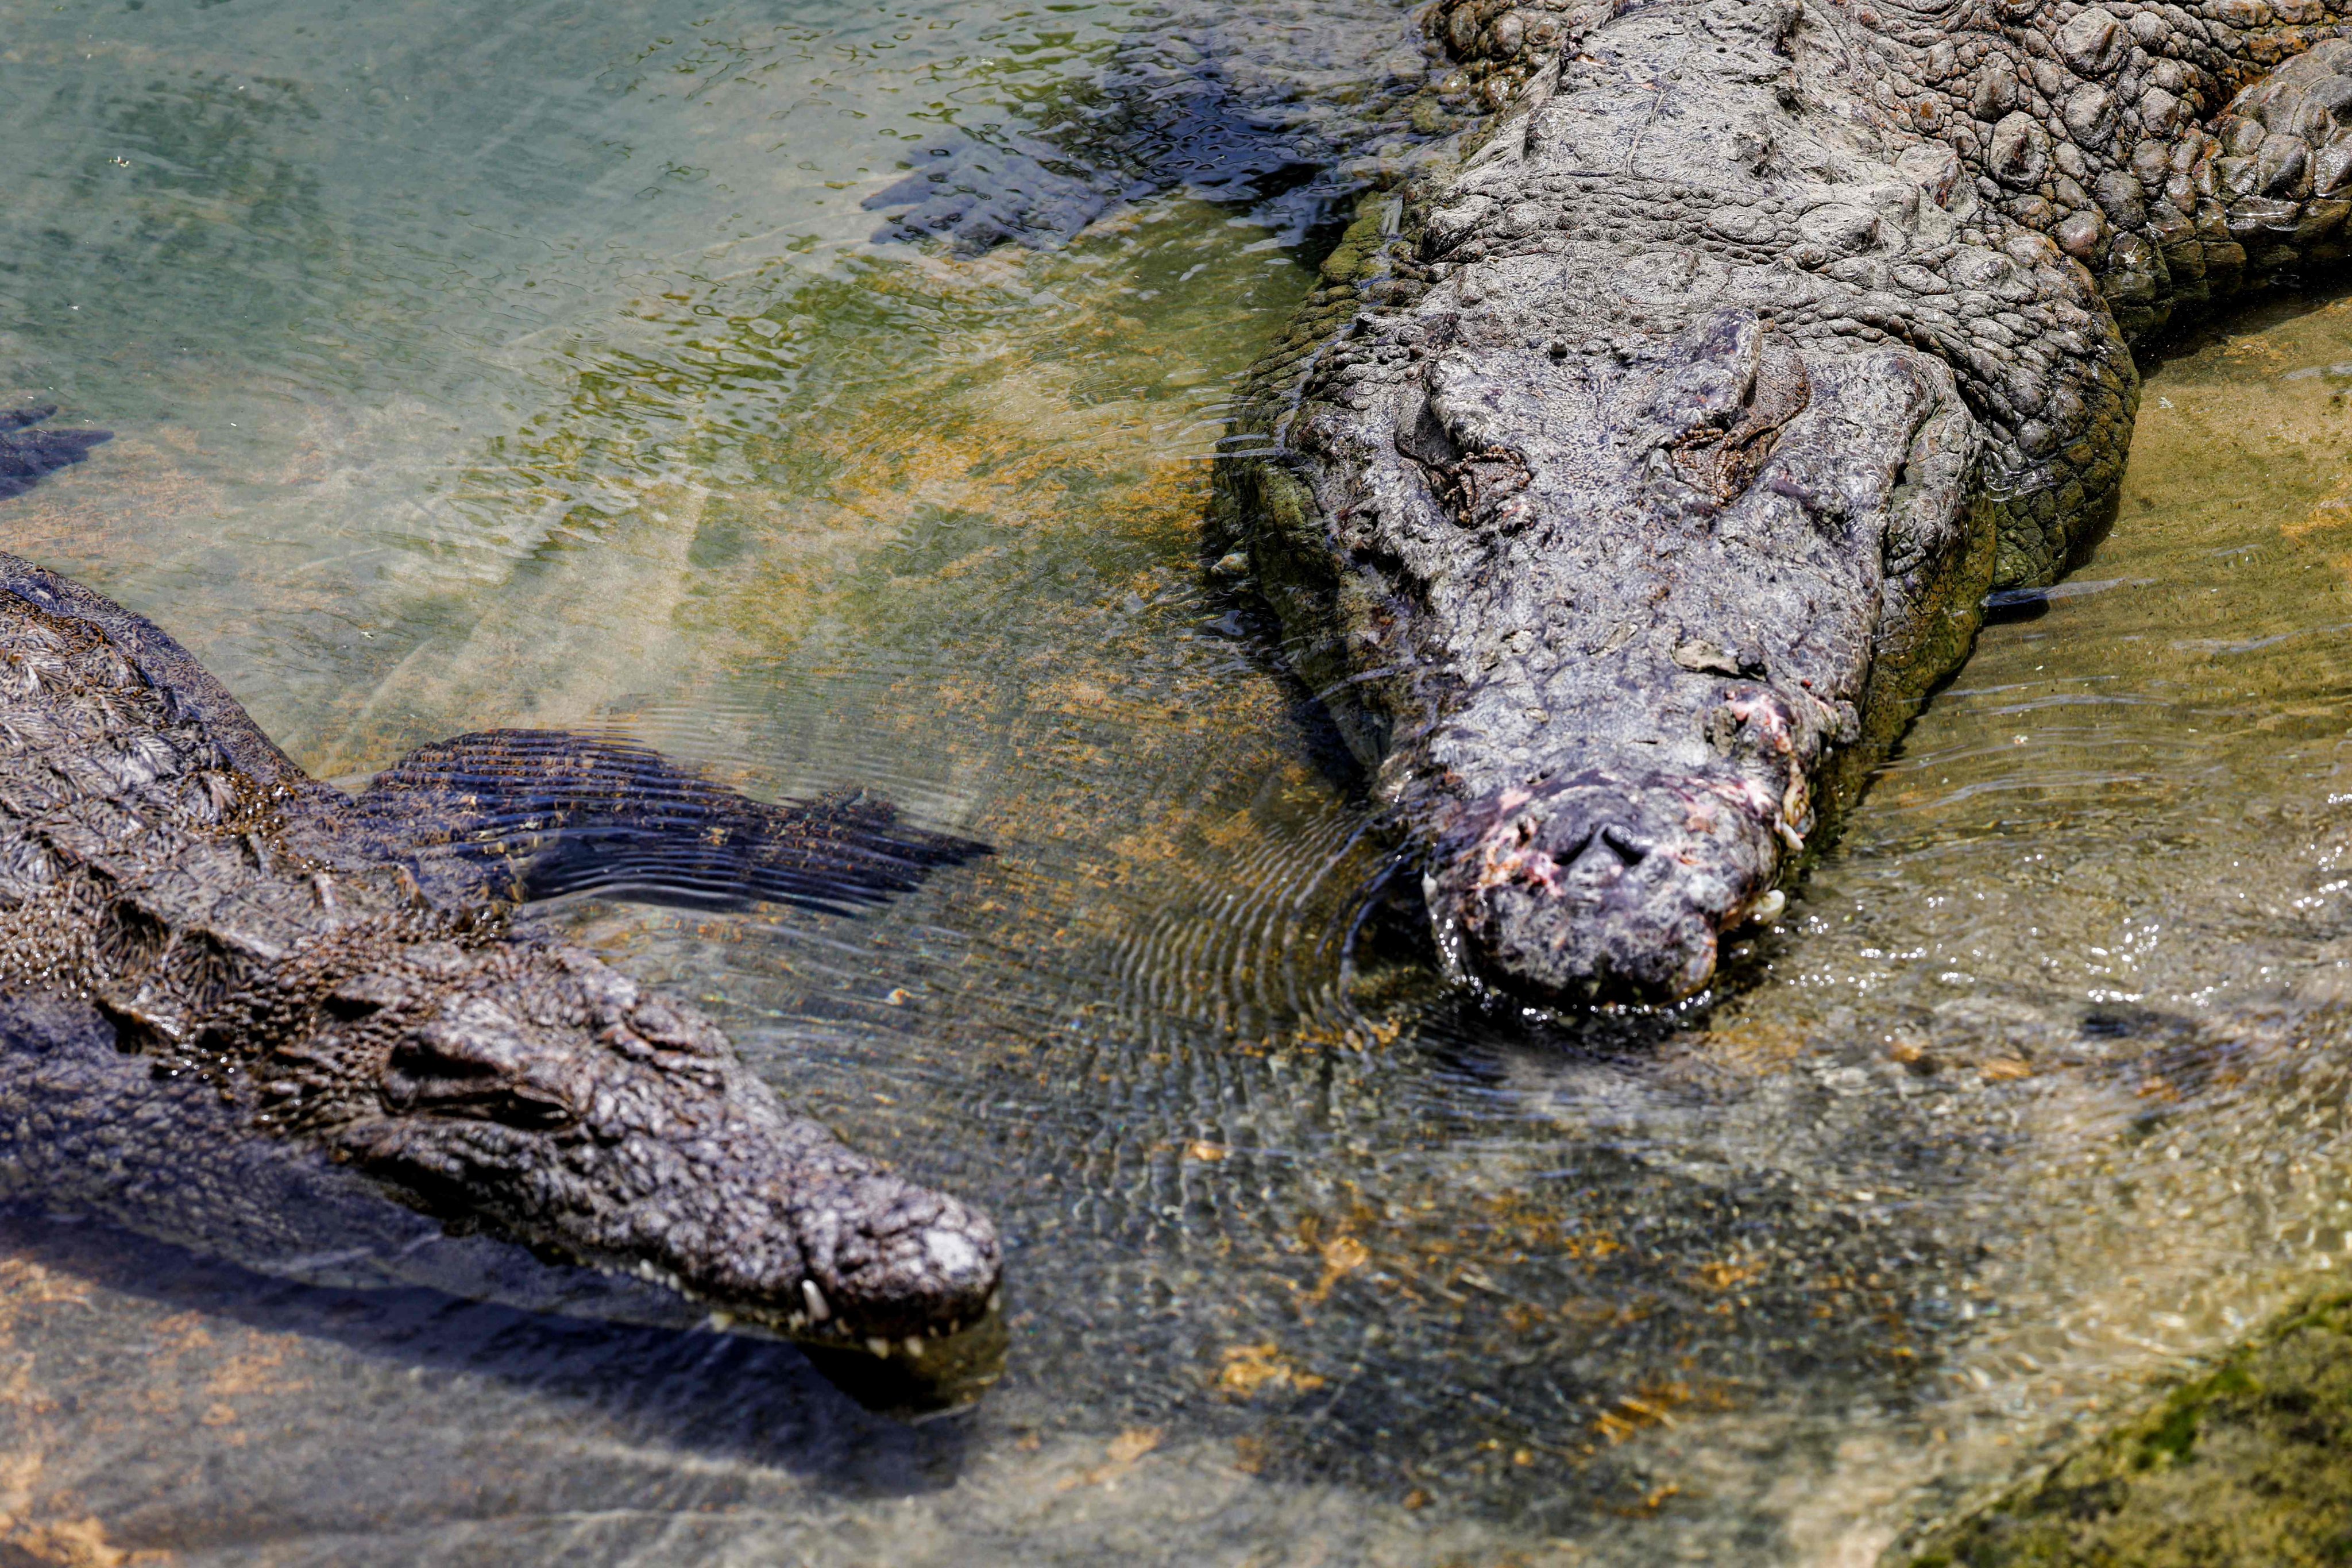 A man in Australia shooed away a crocodile to fish. Then 2 of them ate him